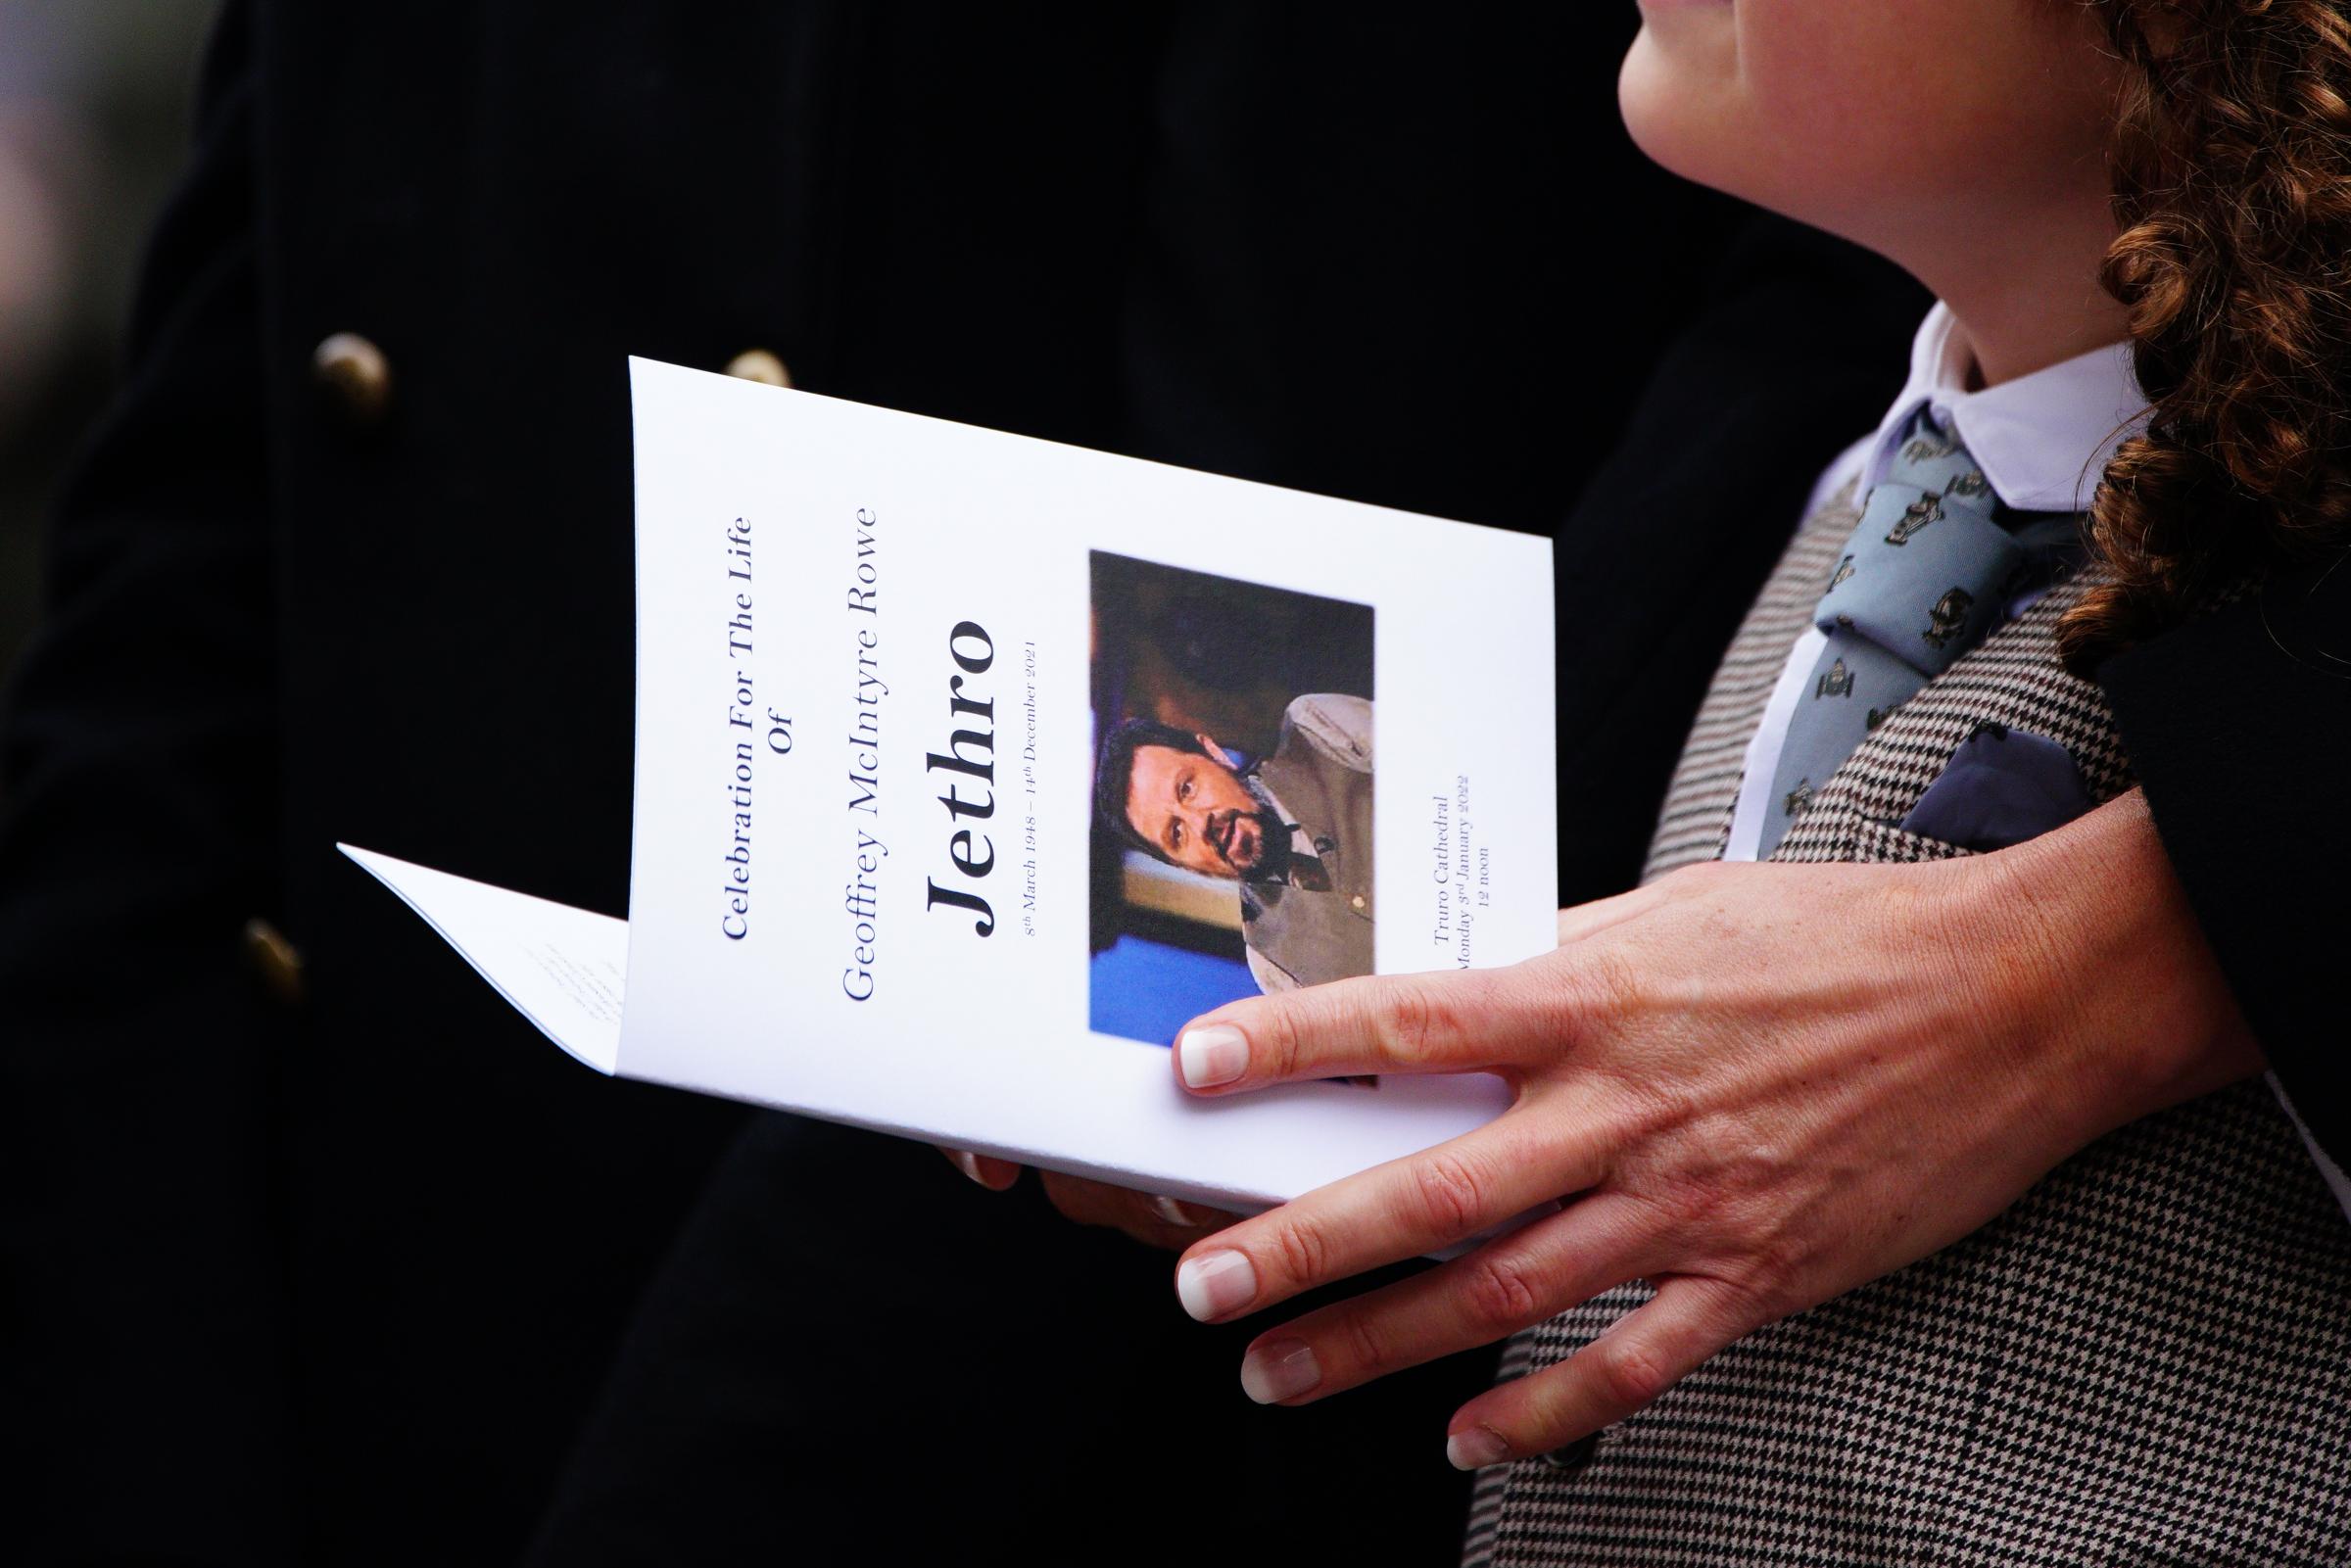 A mourner holds an order of service at the funeral of Cornish comedian Jethro at Truro Cathedral in Cornwall. Jethro, real name Geoffrey Rowe, died on December 14 after contracting Covid-19. Picture date: Monday January 3, 2022.